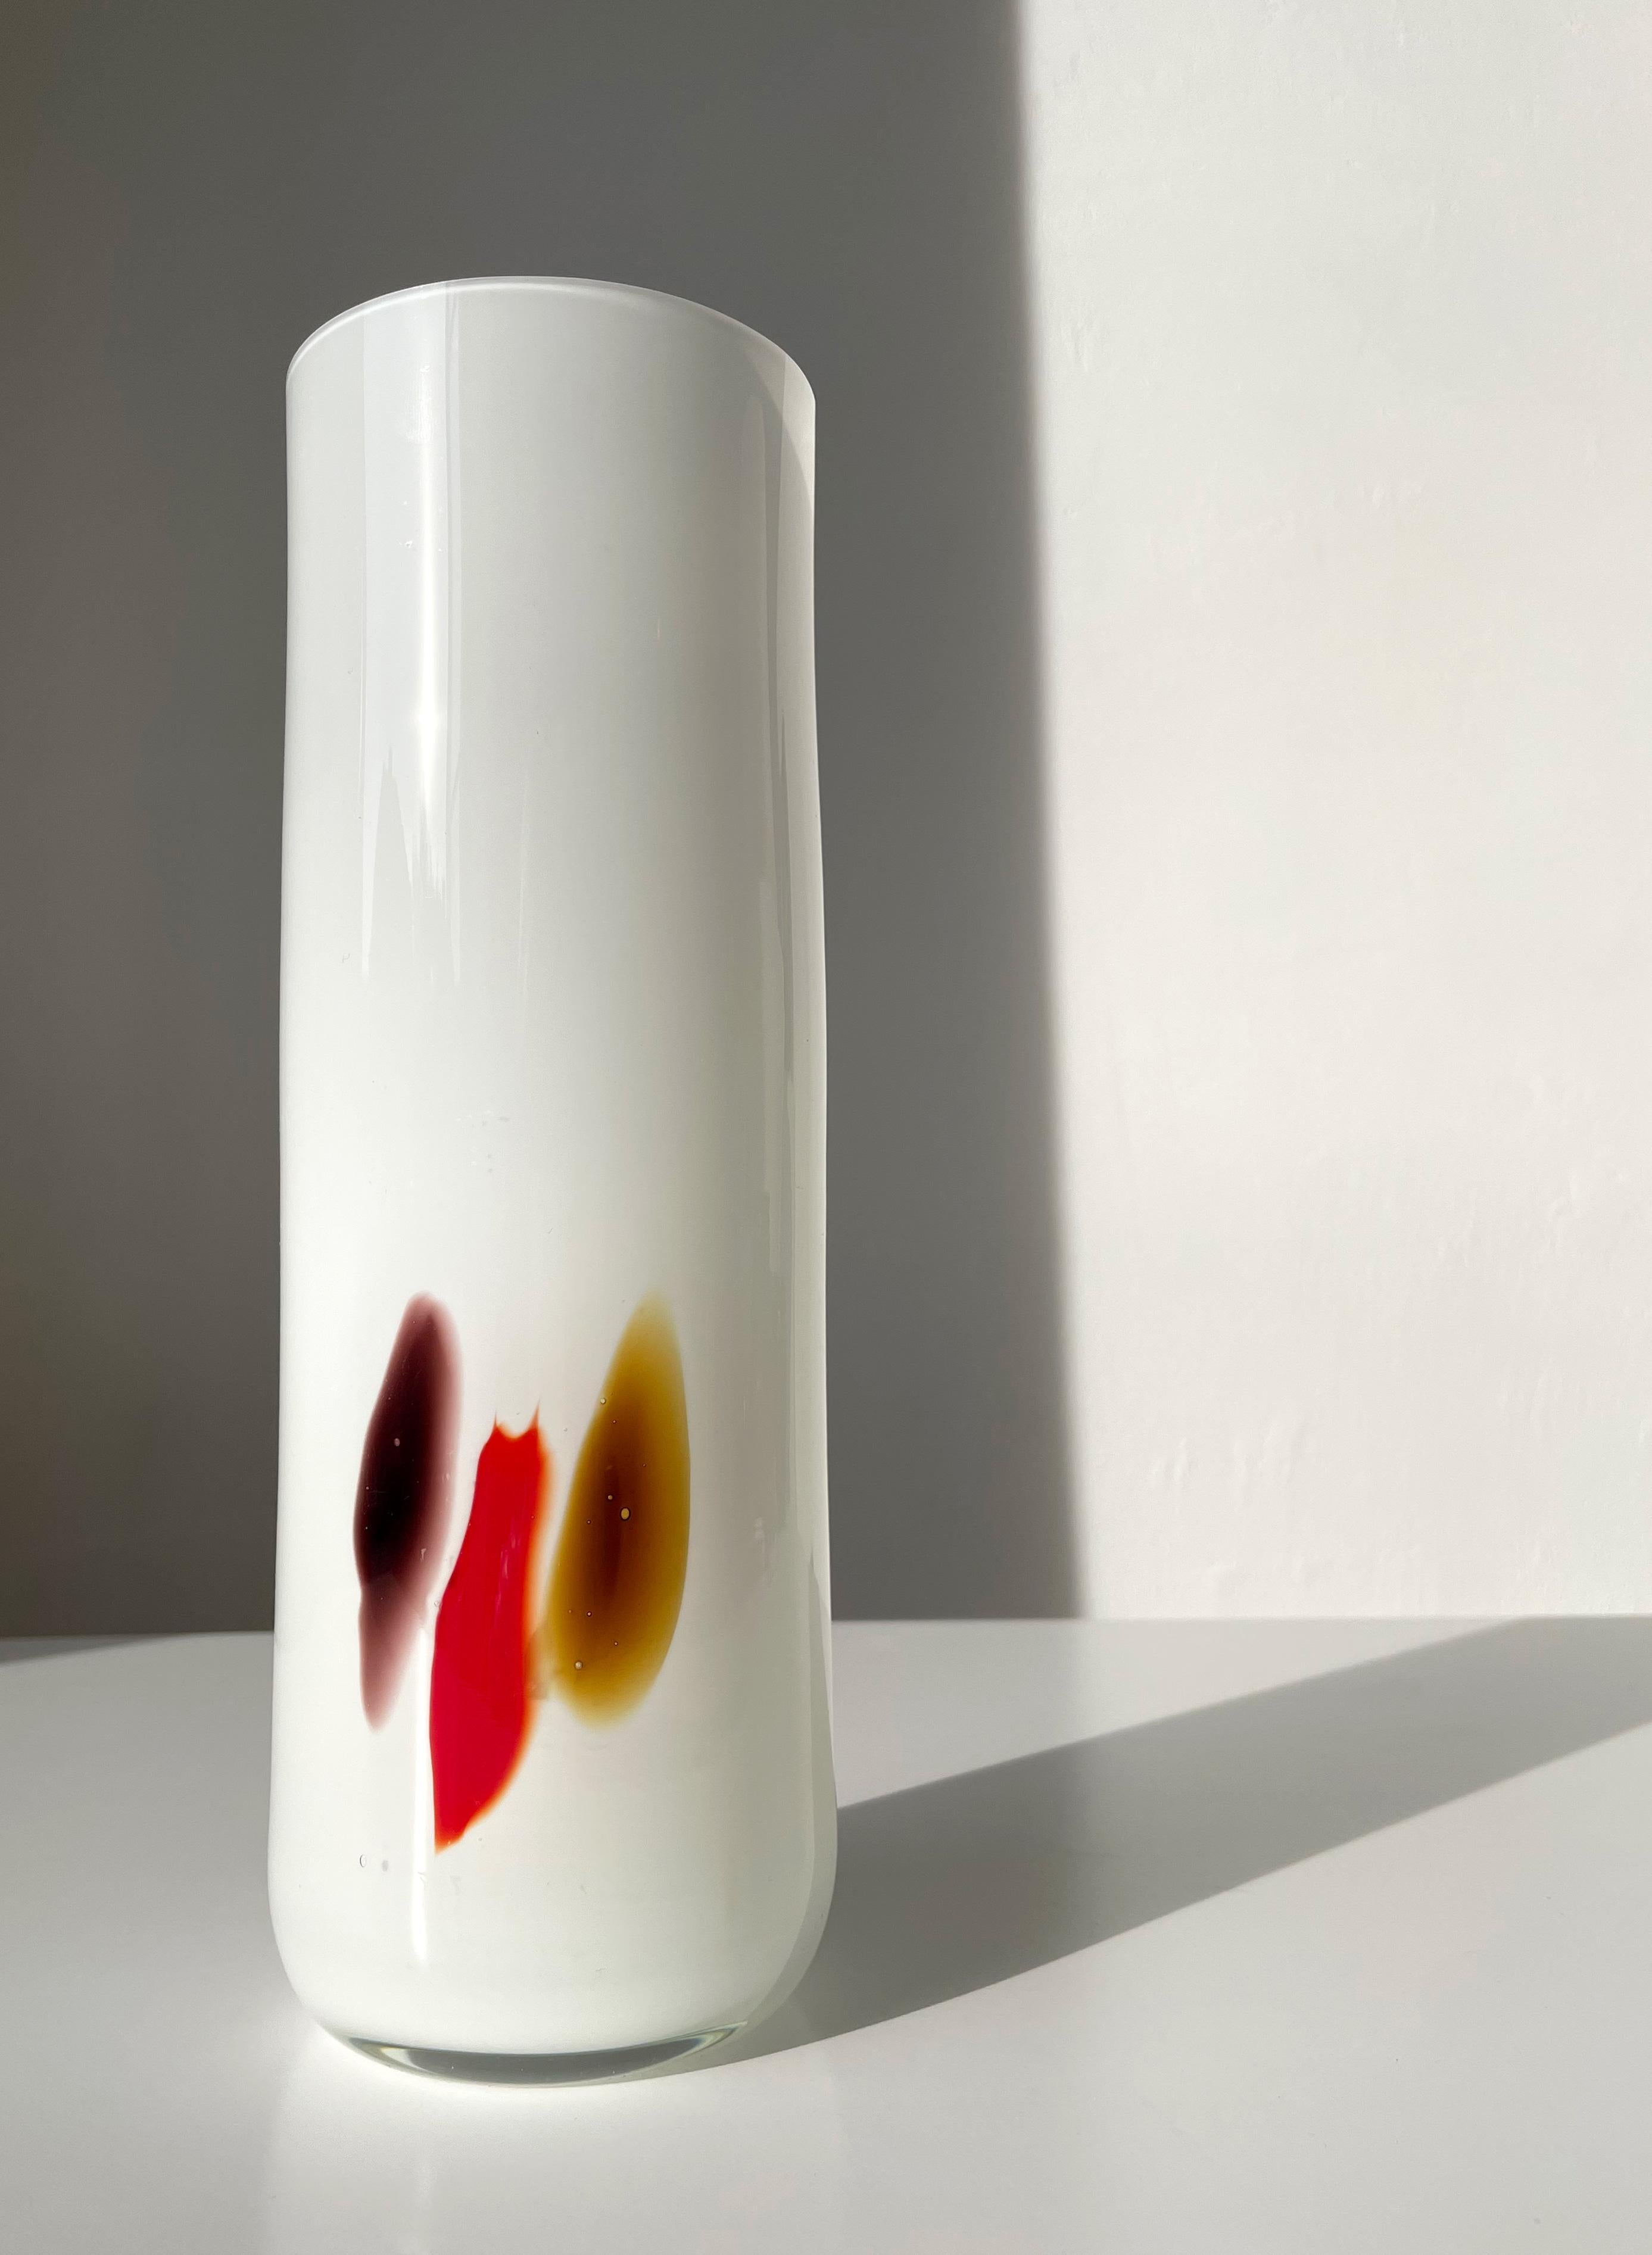 Tall milky white cased in clear glass cylinder shaped Danish modernist art glass vase with three organic decorations in plum, blood red and umber colors. Manufactured in the town of Naestved by Holmegaard in the 1970s. Beautiful vintage